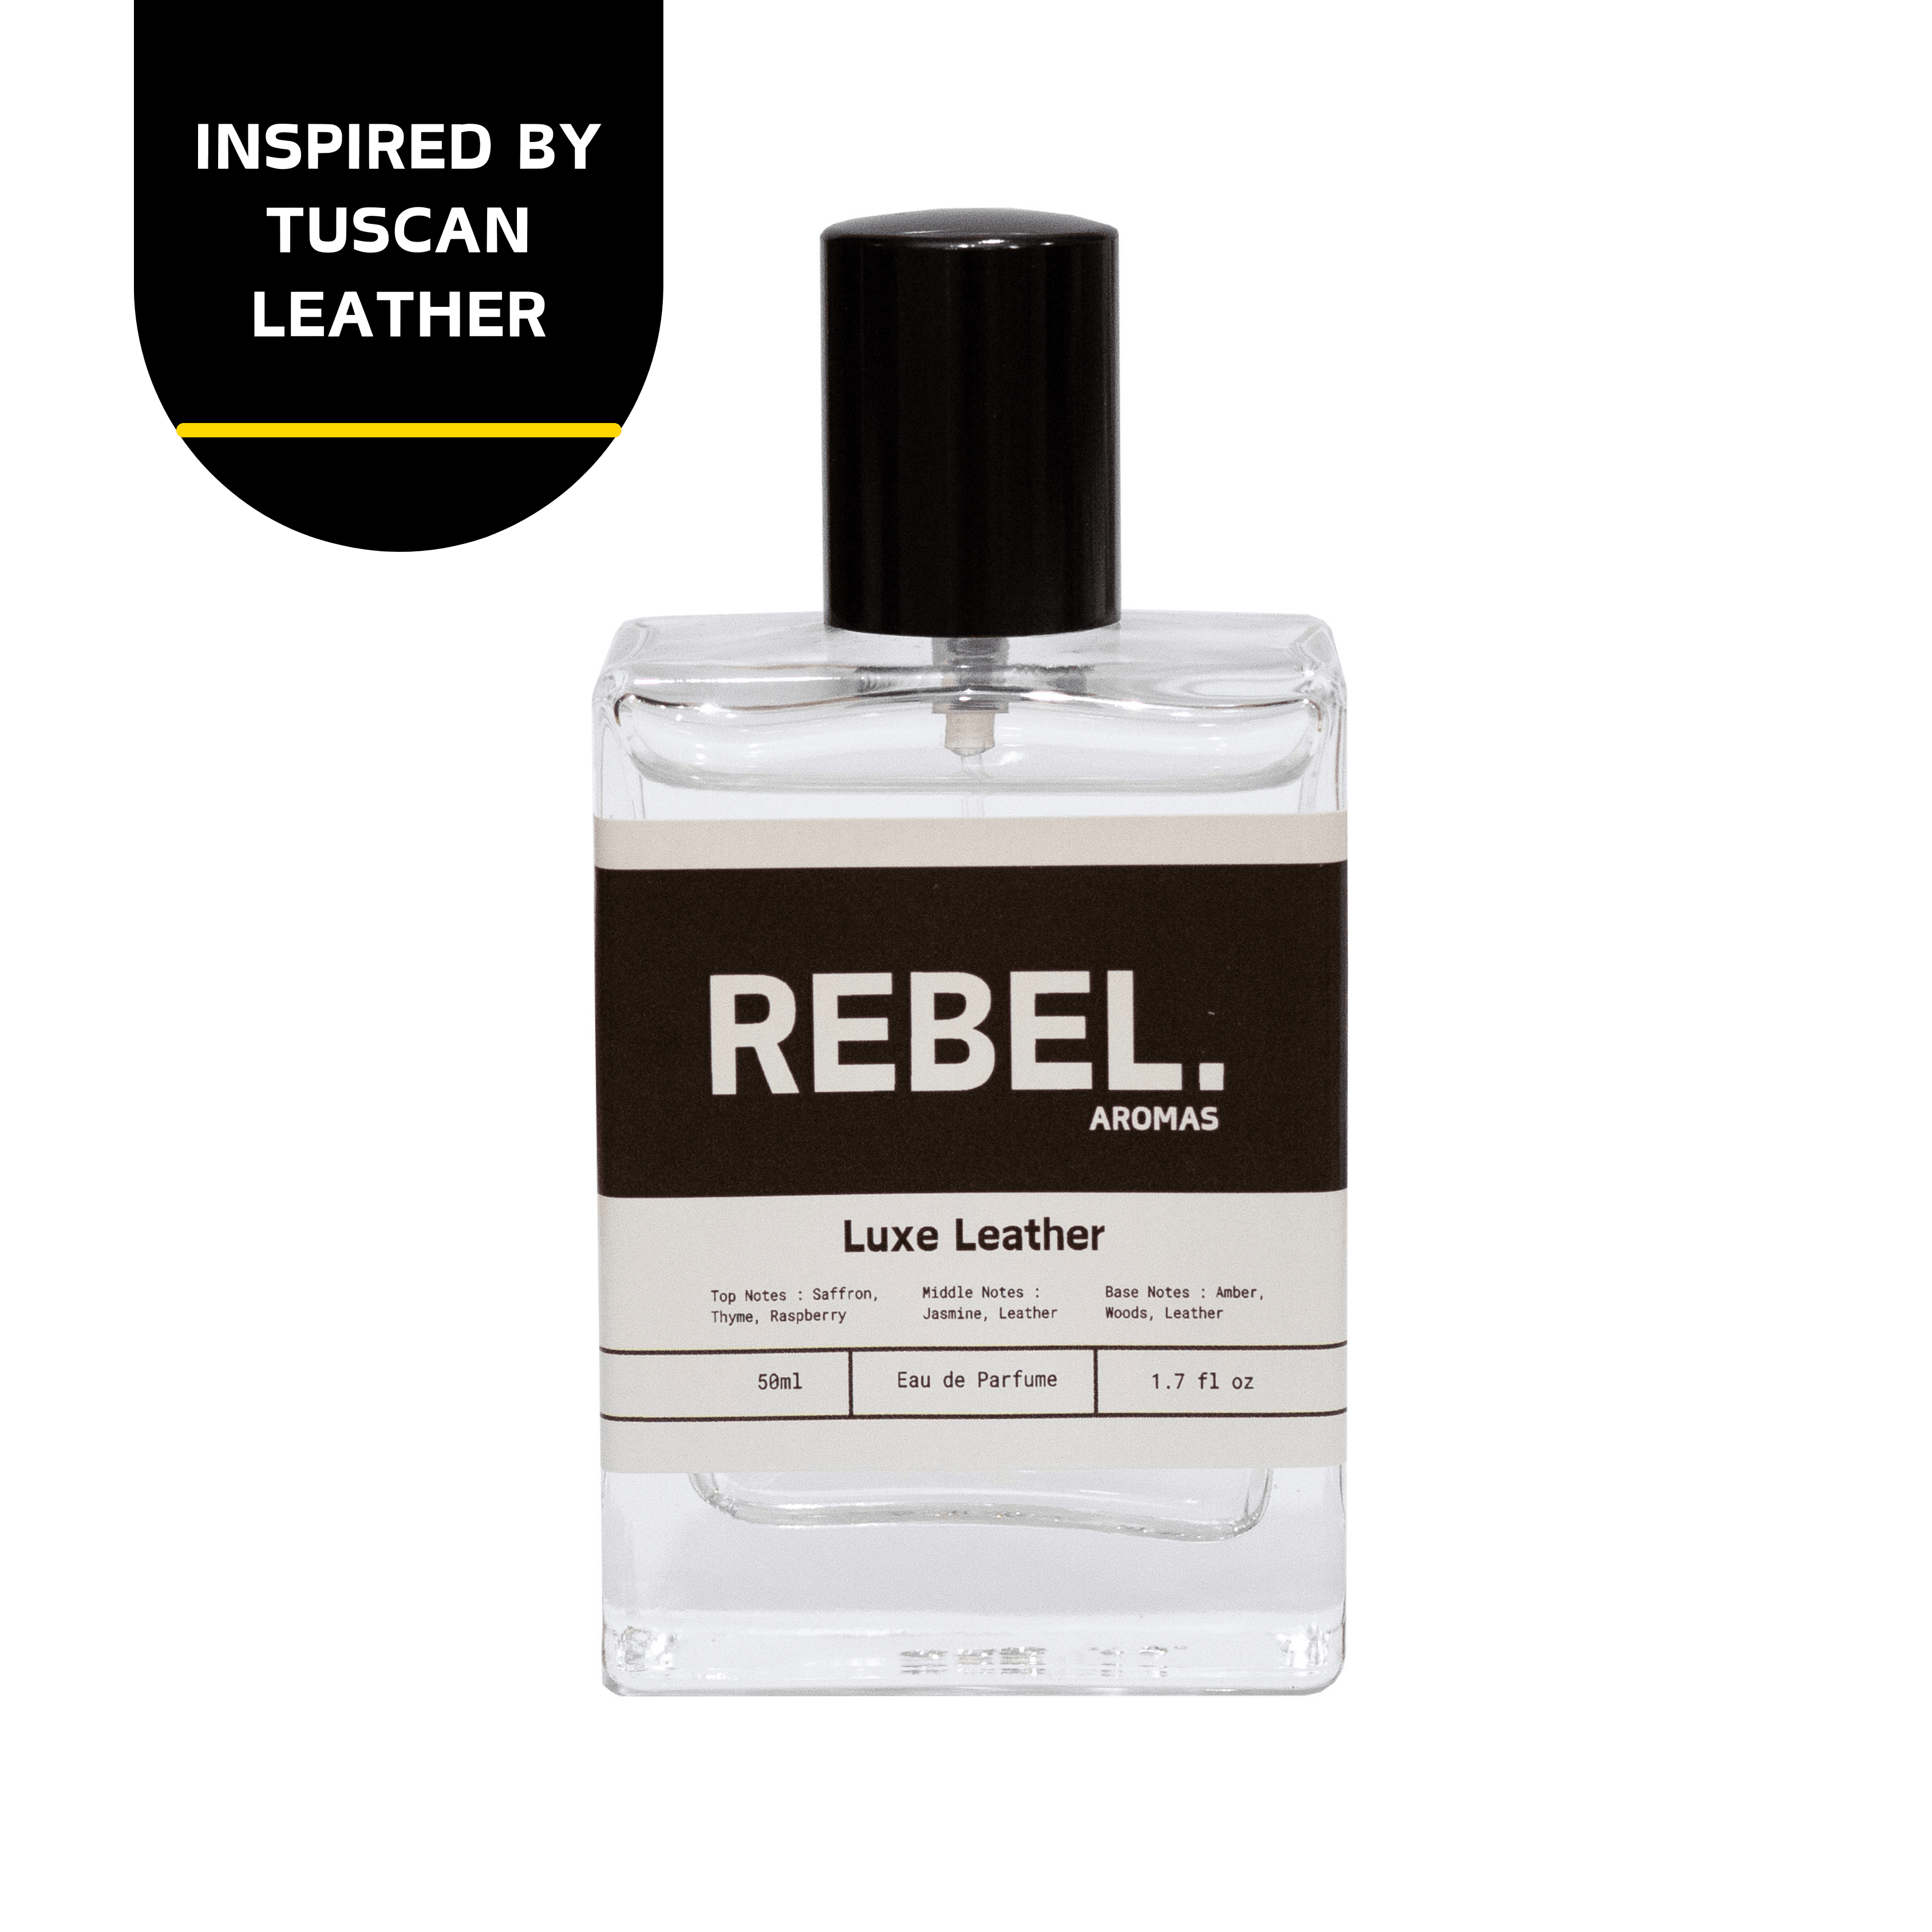 Luxe Leather - Rebel Aromas